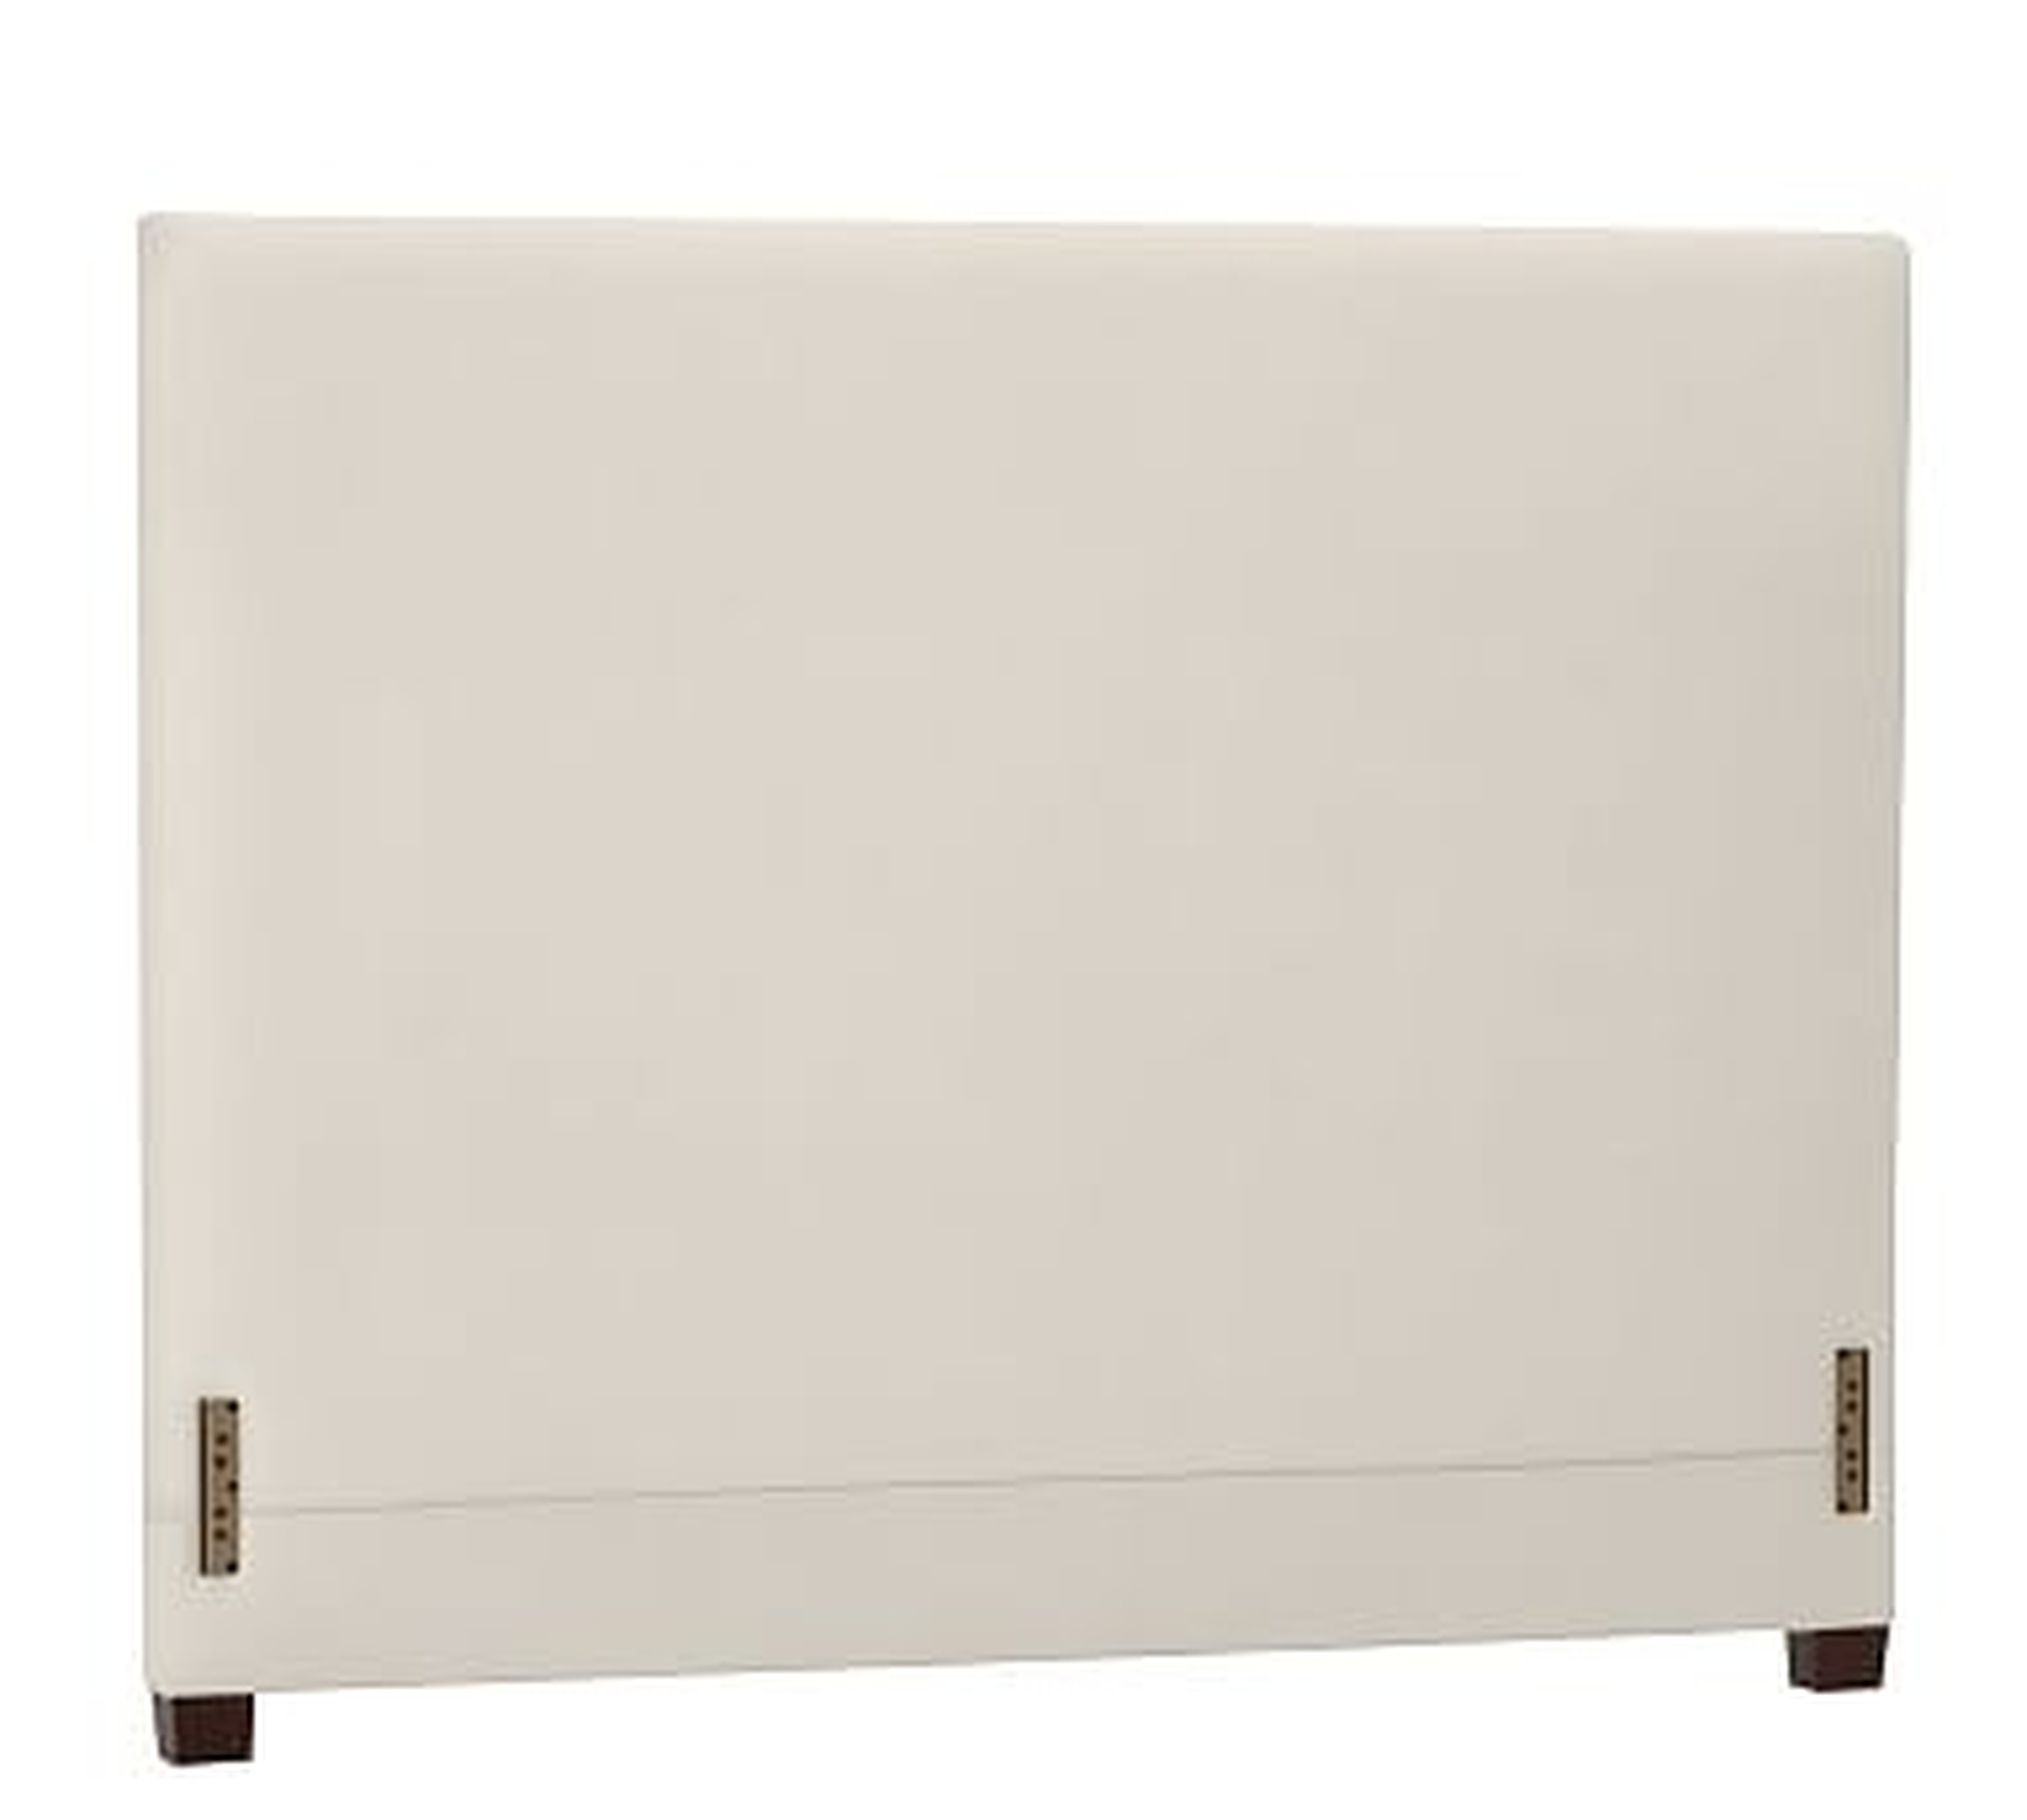 Raleigh Upholstered Square Queen Headboard without Nailheads, Twill Cream - Pottery Barn